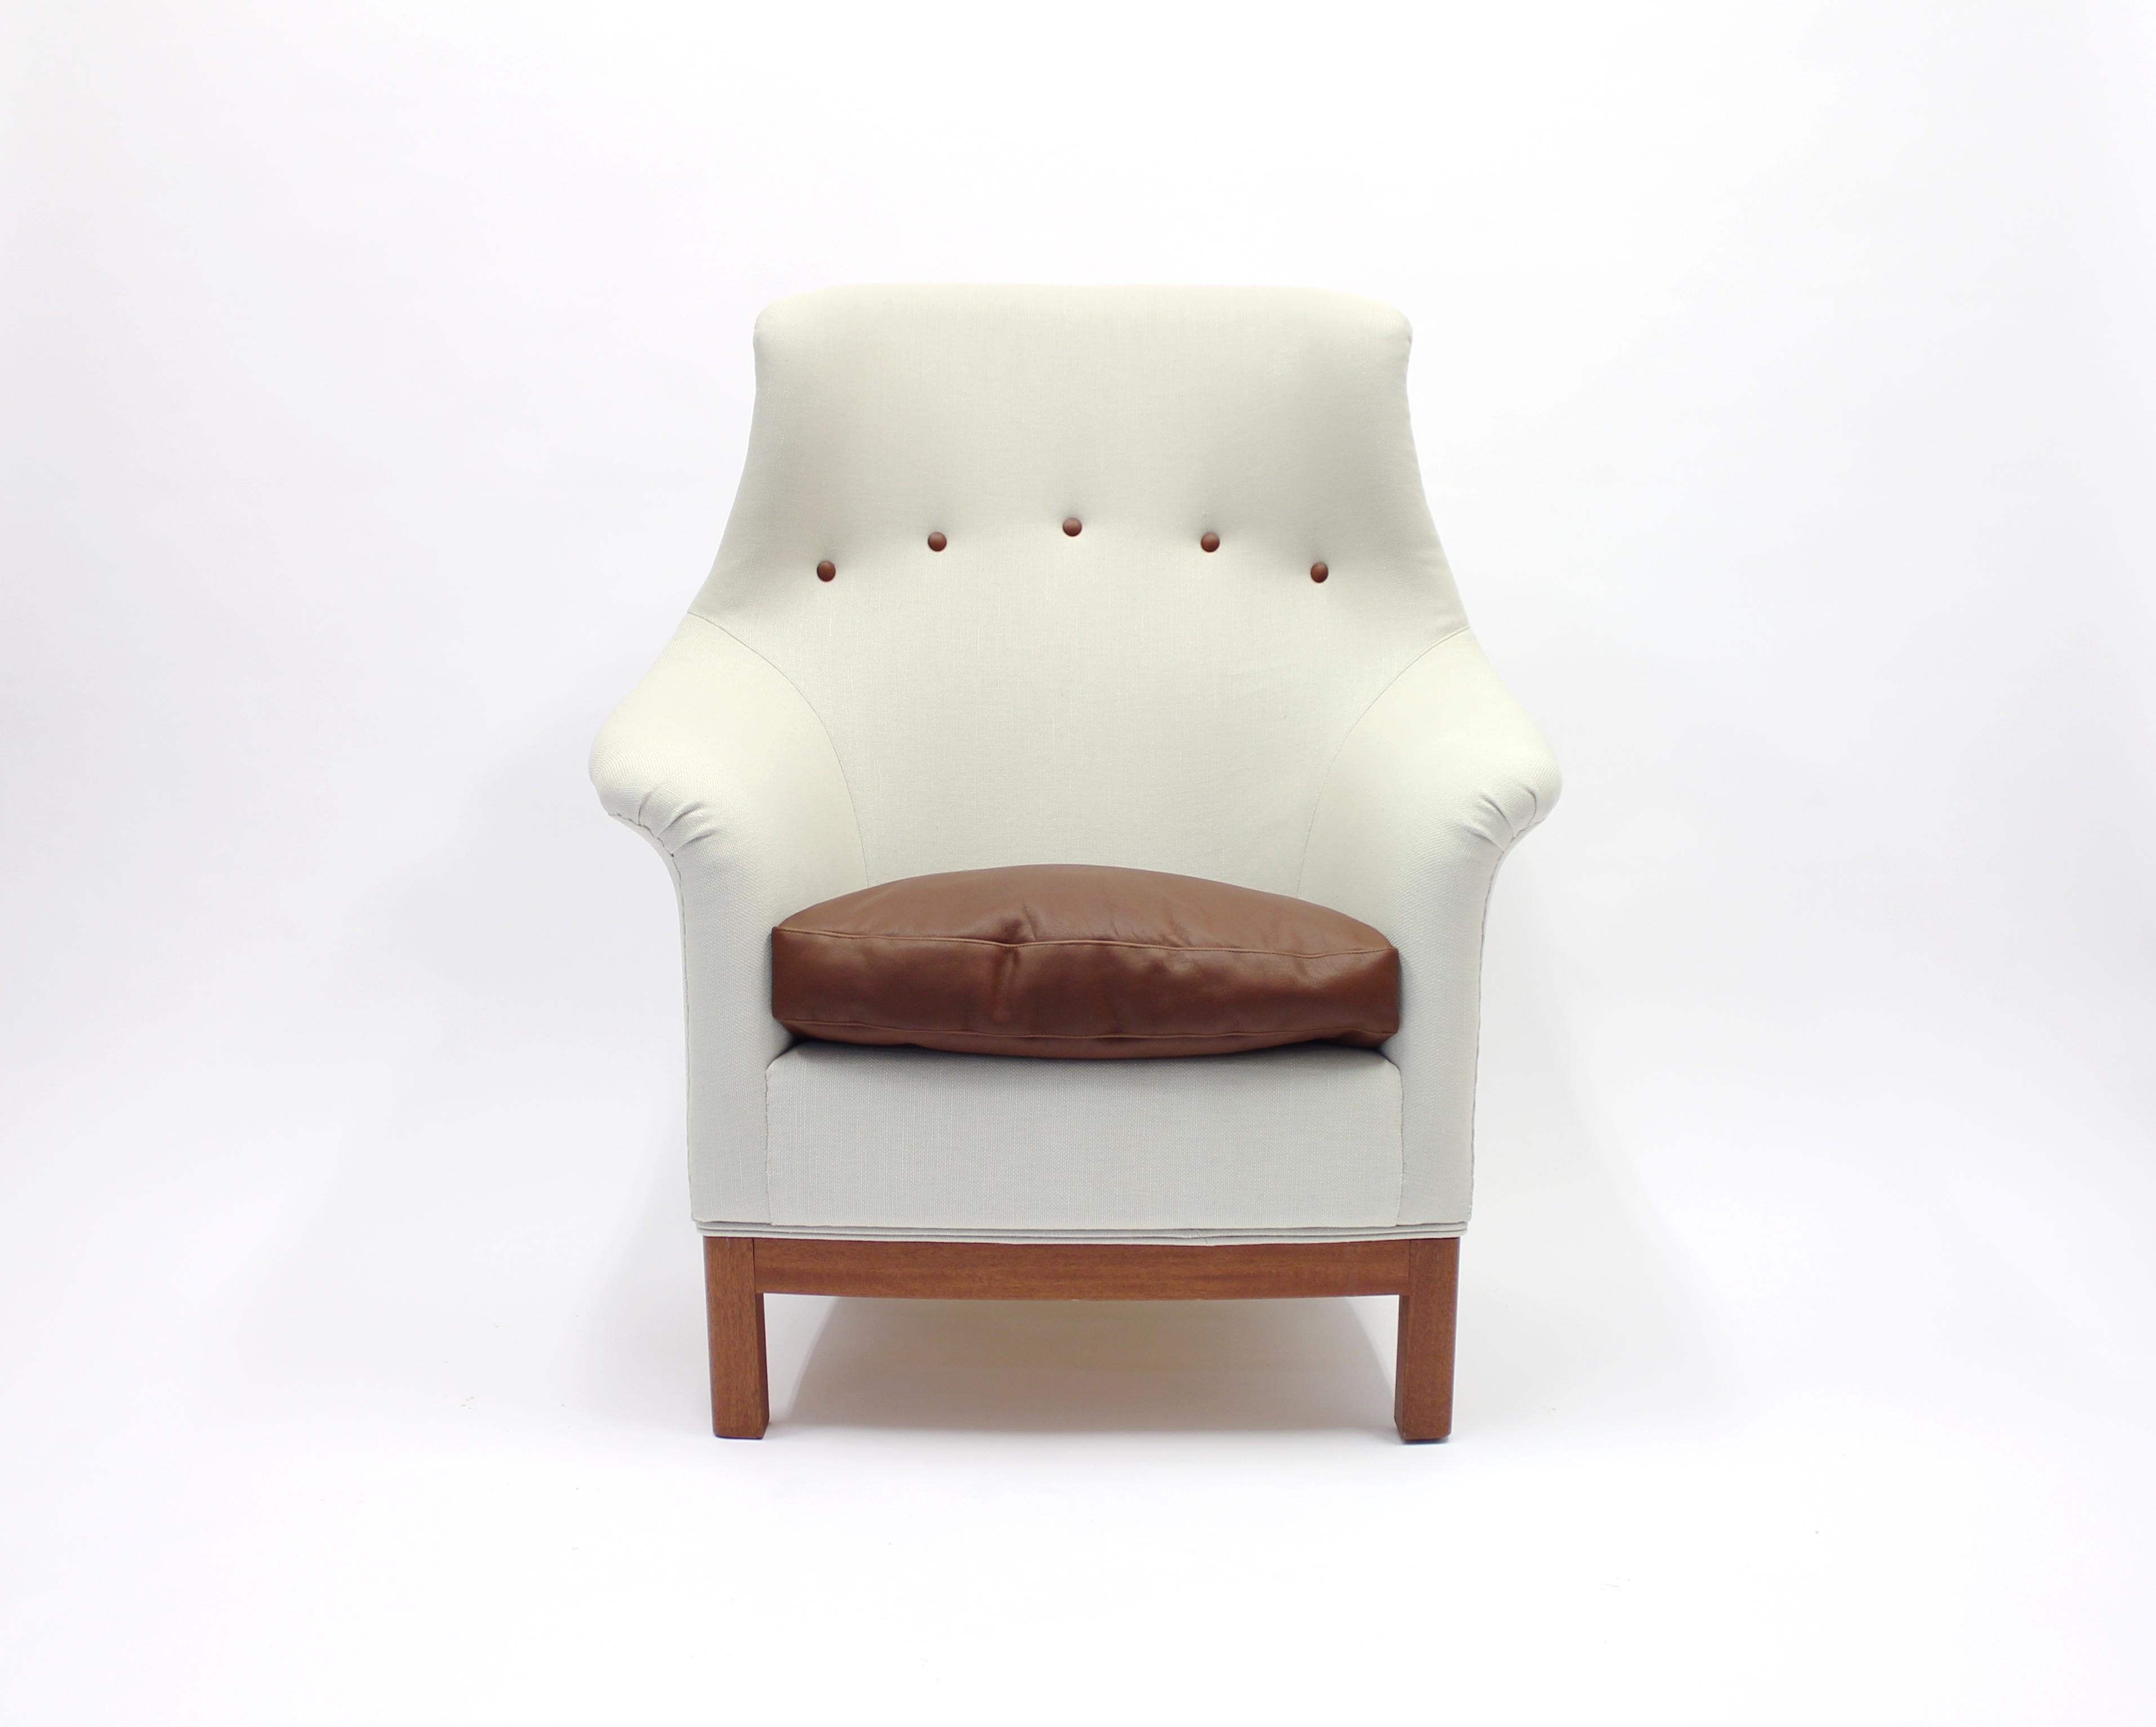 Very rare lounge chair by Kerstin Hörlin-Holmquist from her Triva-Family series, model 564-071. Made by Nordiska Kompaniet. This particularly model has to be considered as a very close relative to another model from the same period and maker, Onkel